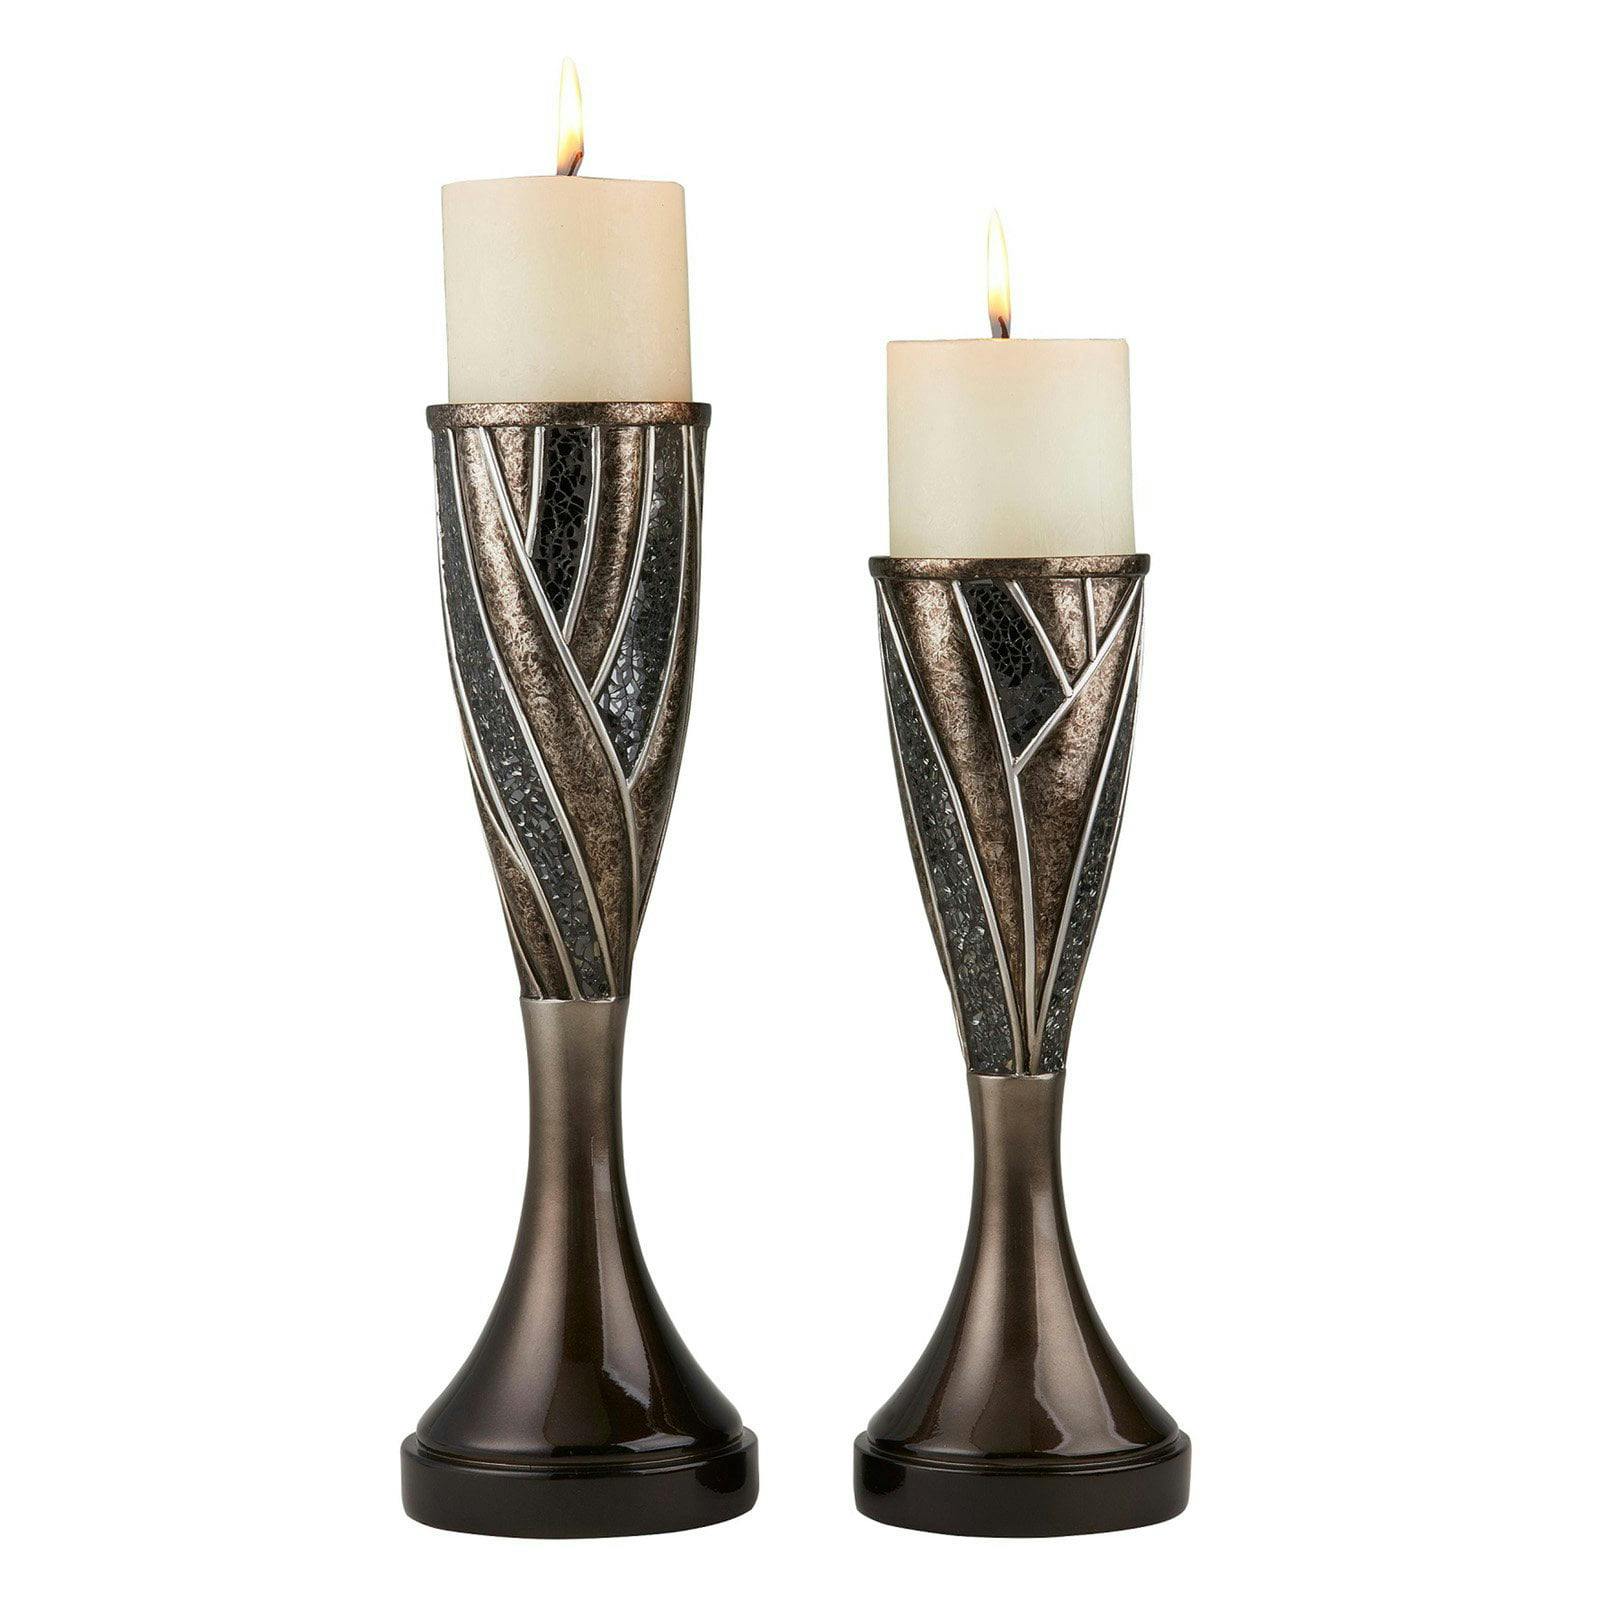 Lelei Bronze Transitional Silhouette Candleholder Set with Floral Accents